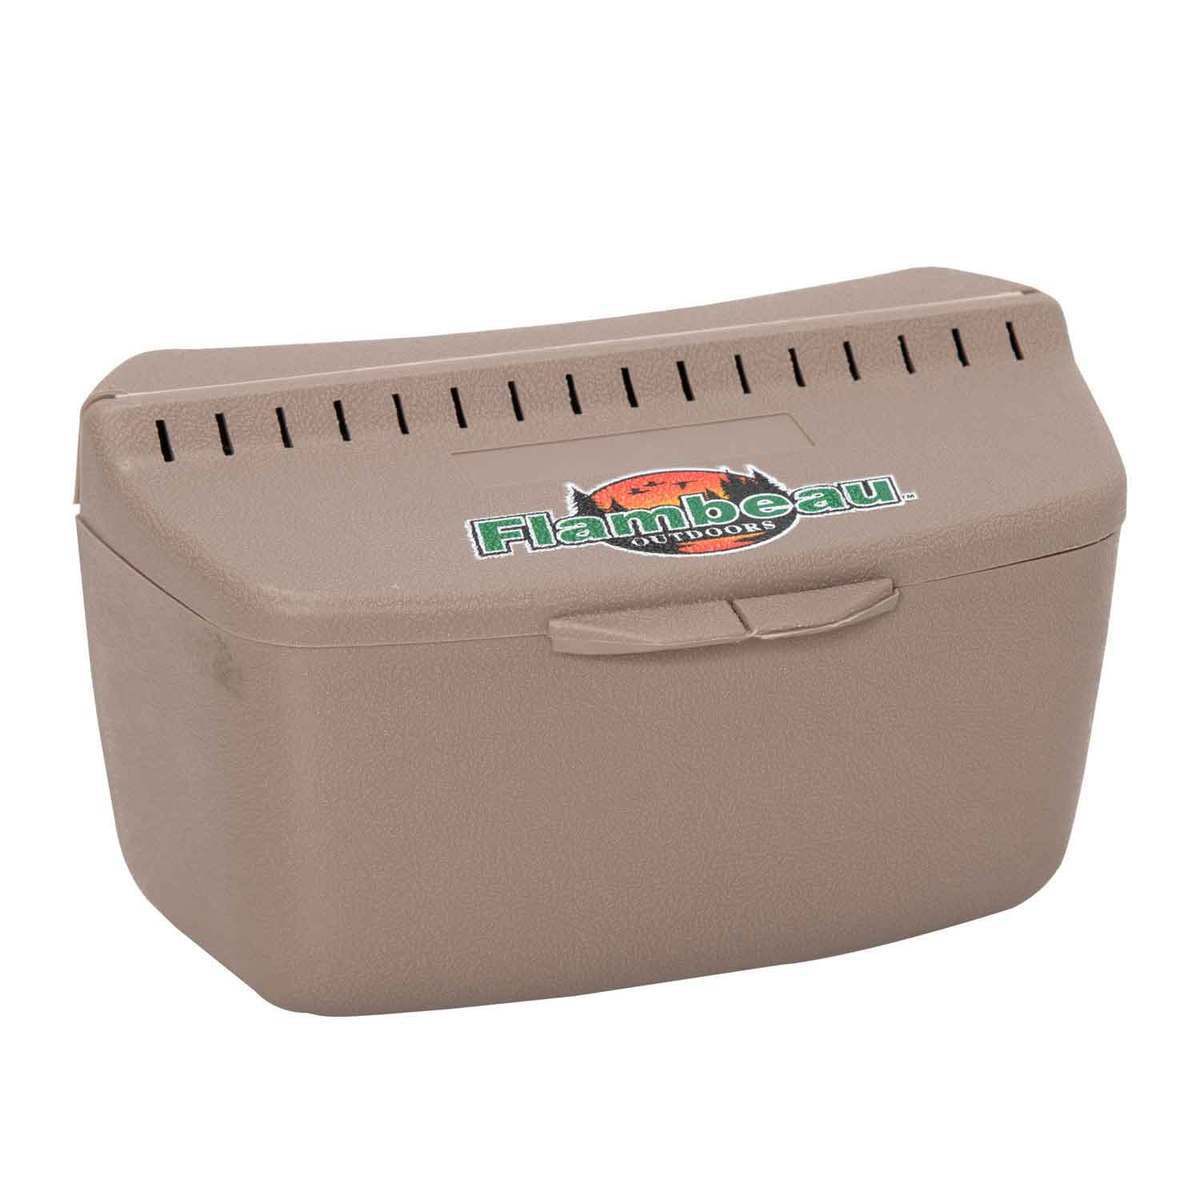 Flambeau Marine Dry Box Review by Electro Reviews